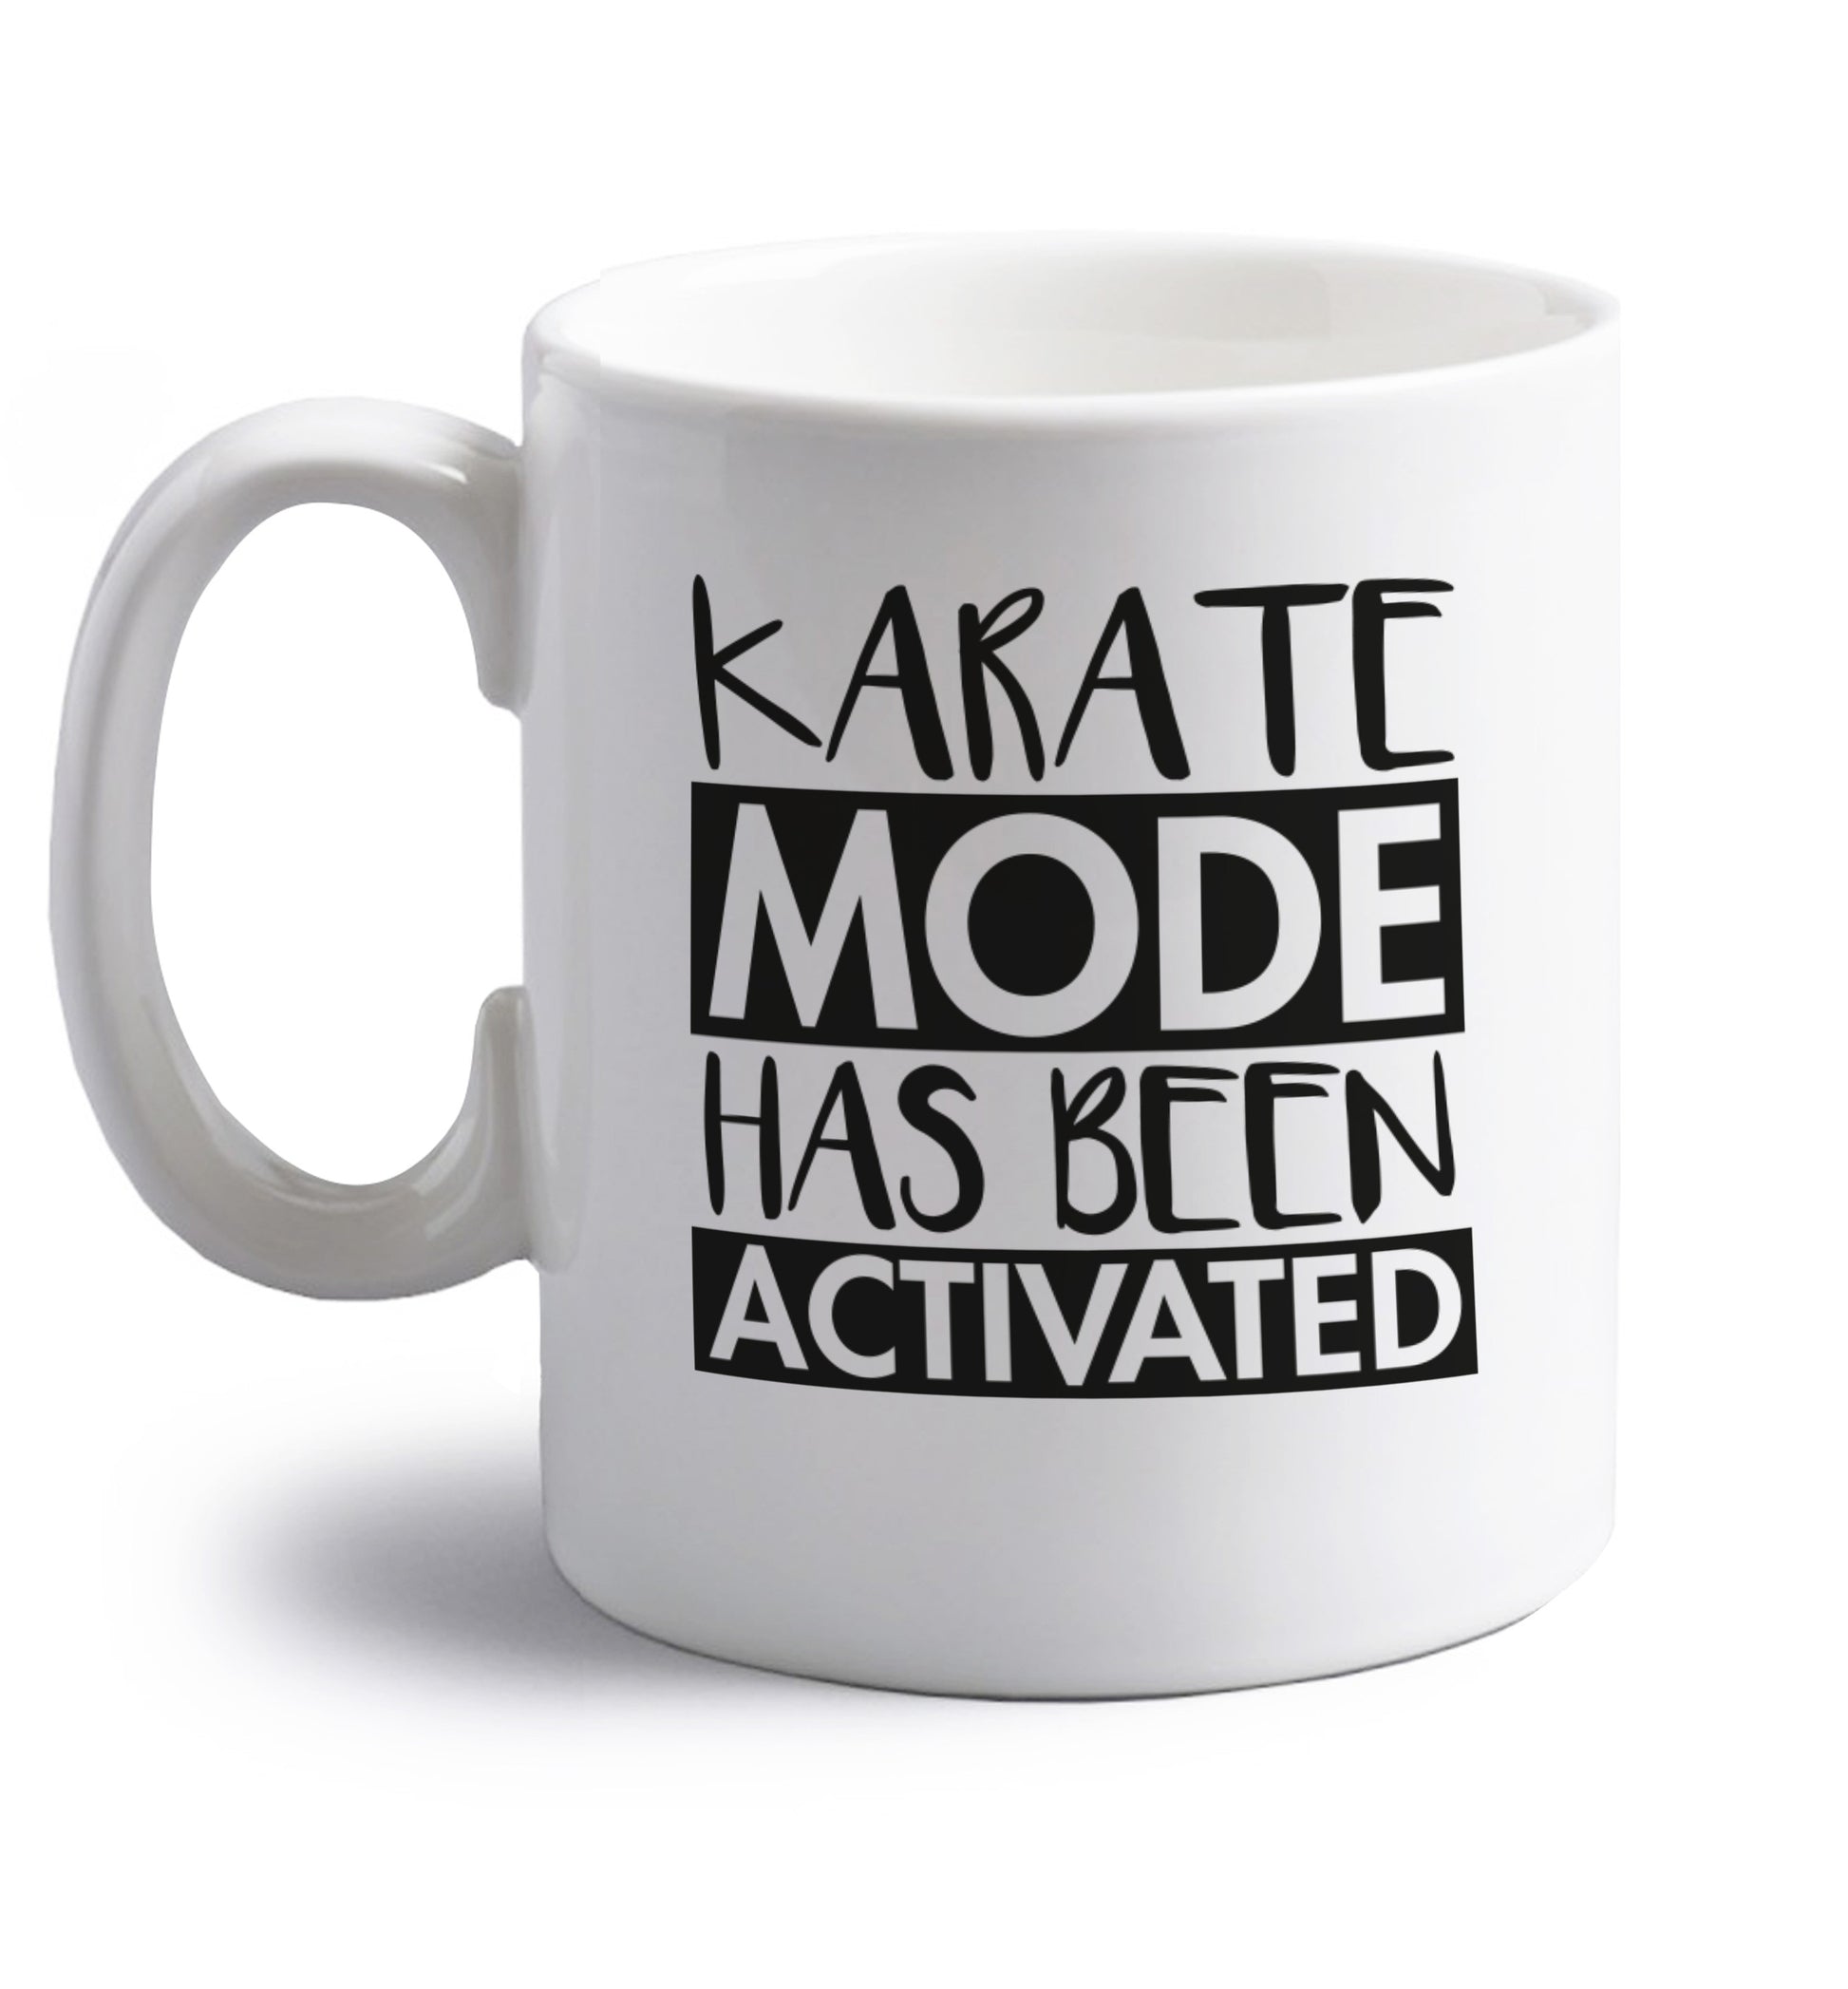 Karate mode activated right handed white ceramic mug 